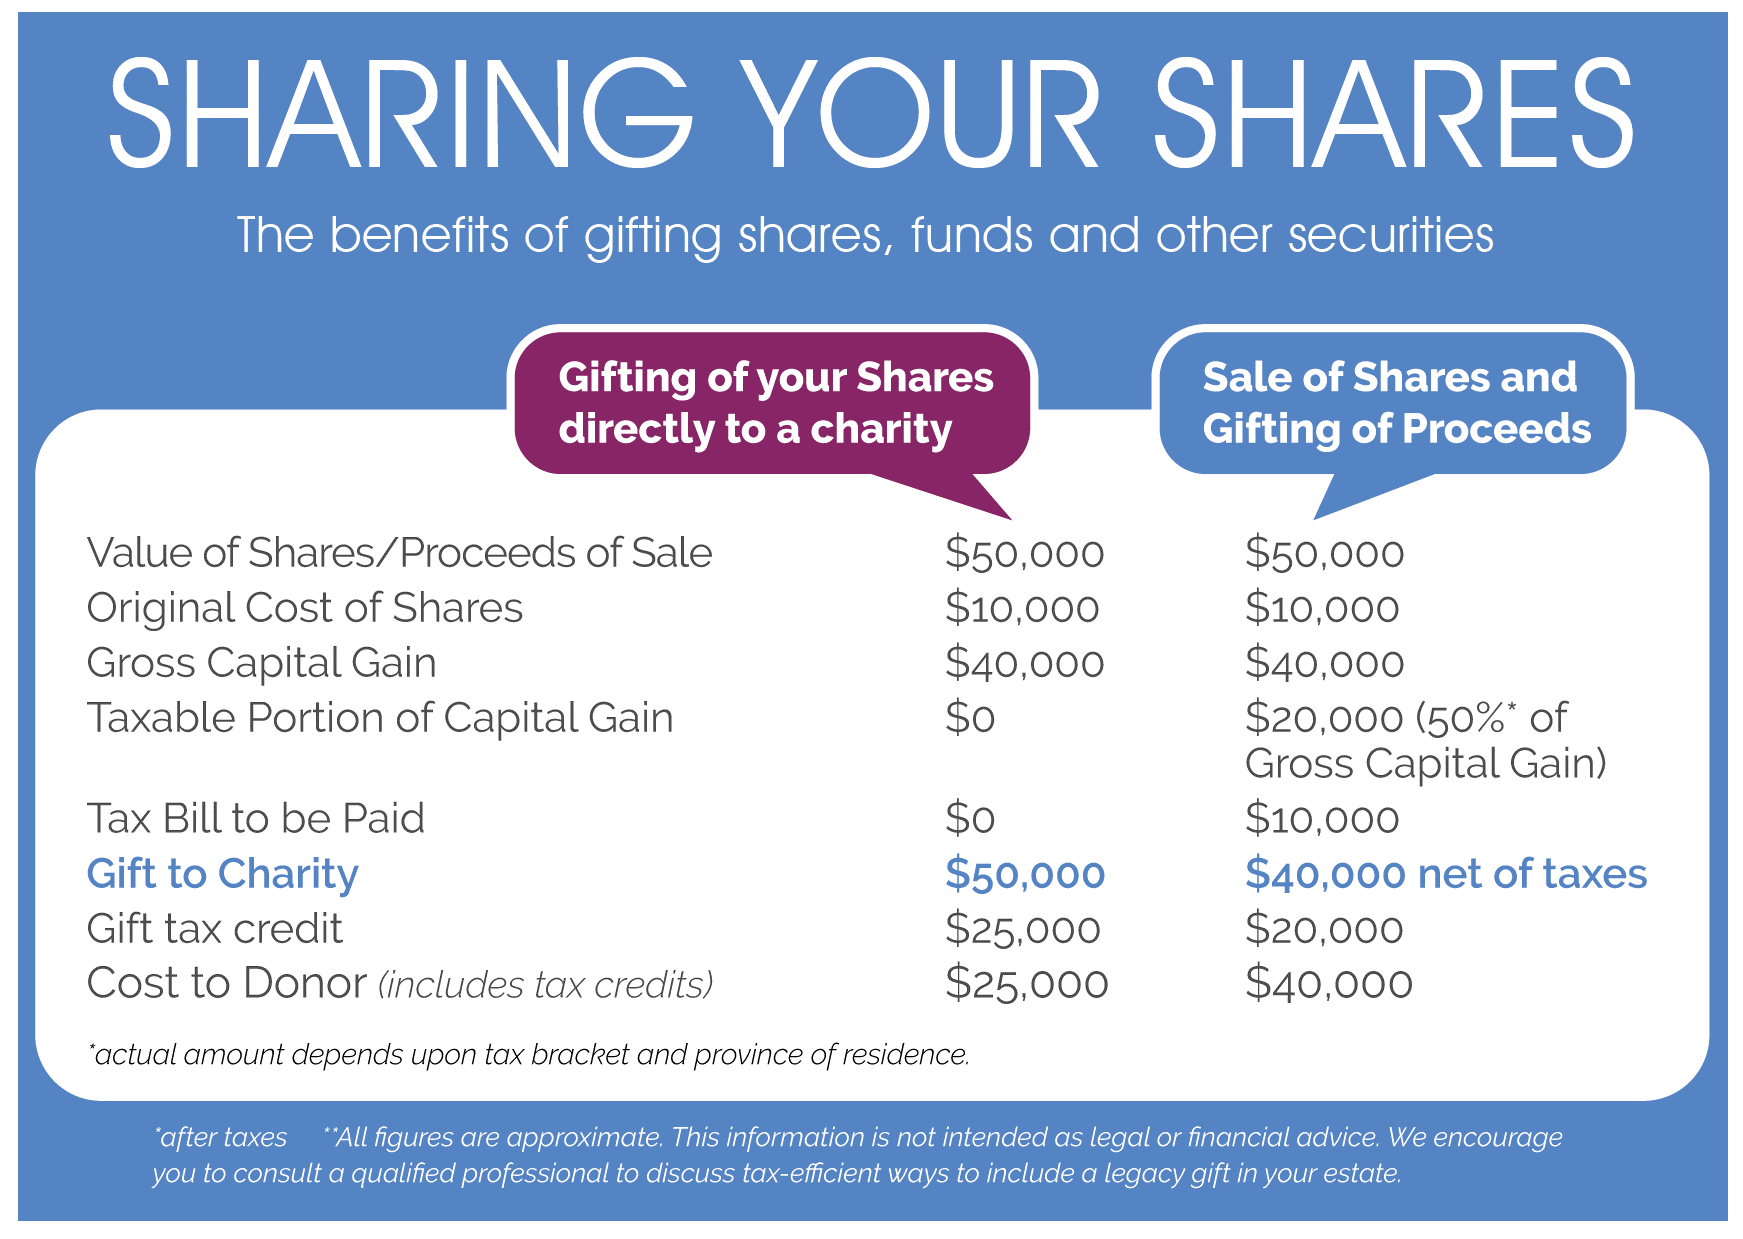 Image outlining the benefits of gifting shares, funds and other securities.